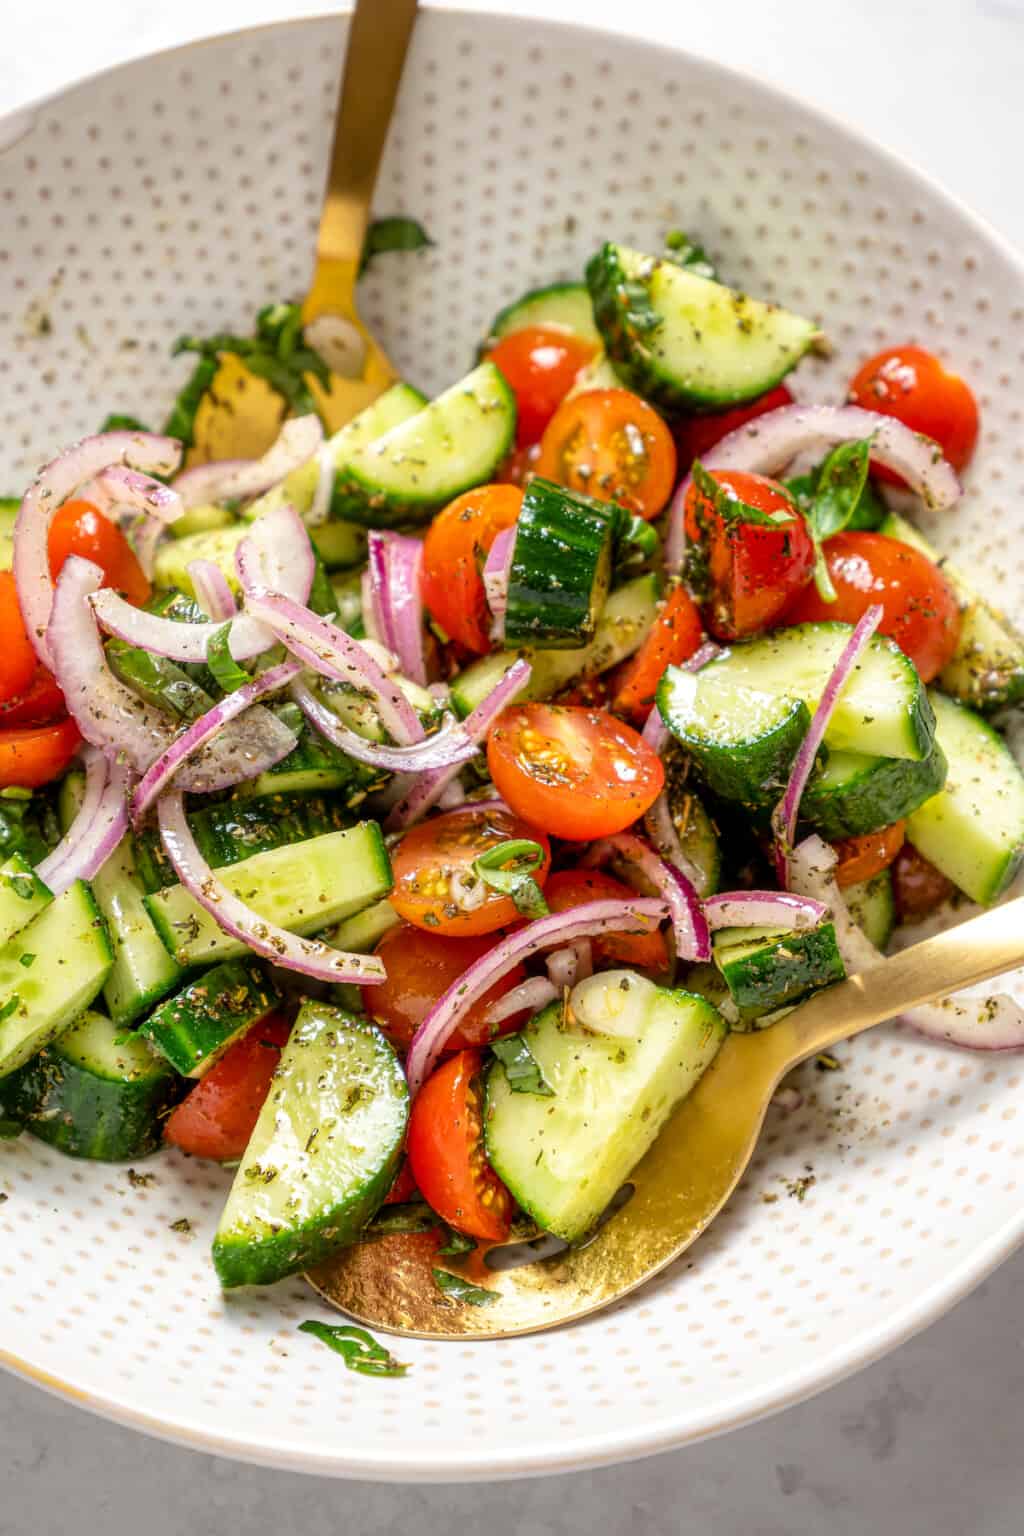 Easy Vegan Cucumber and Tomato Salad | Jessica in the Kitchen